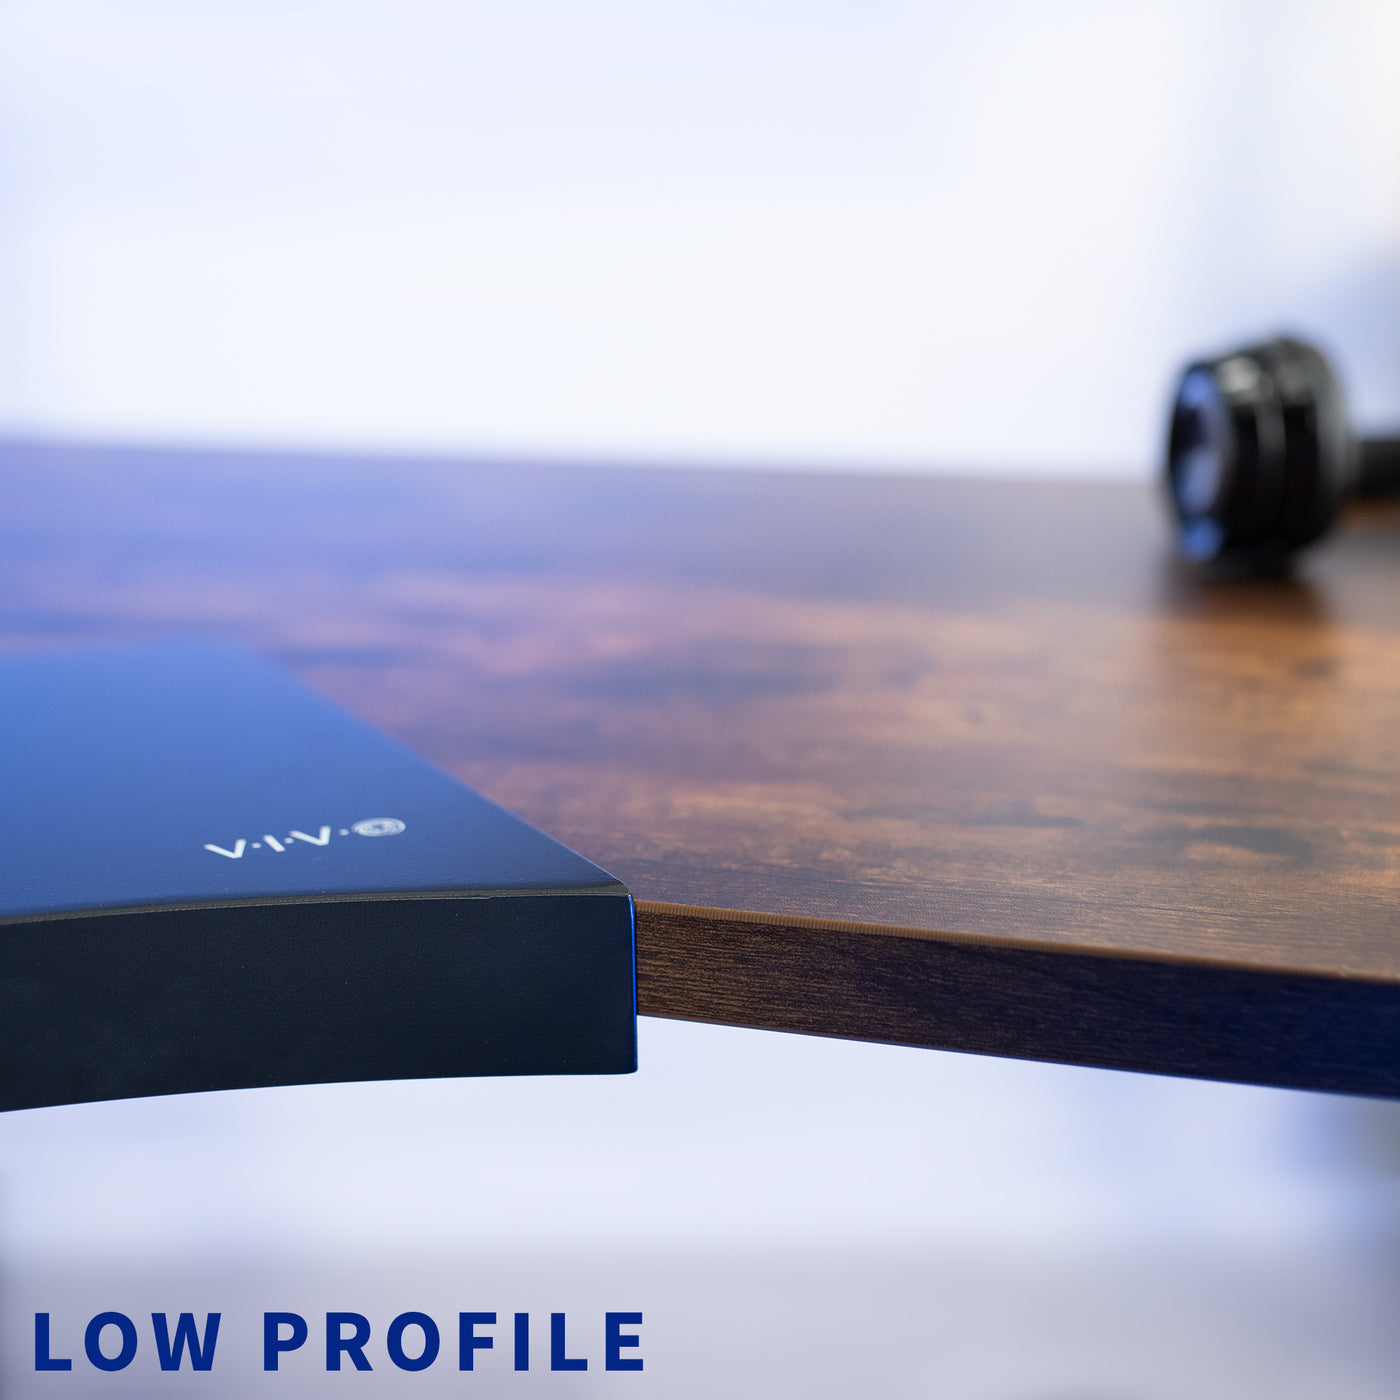 Low profile helps your office space flow together efficiently.